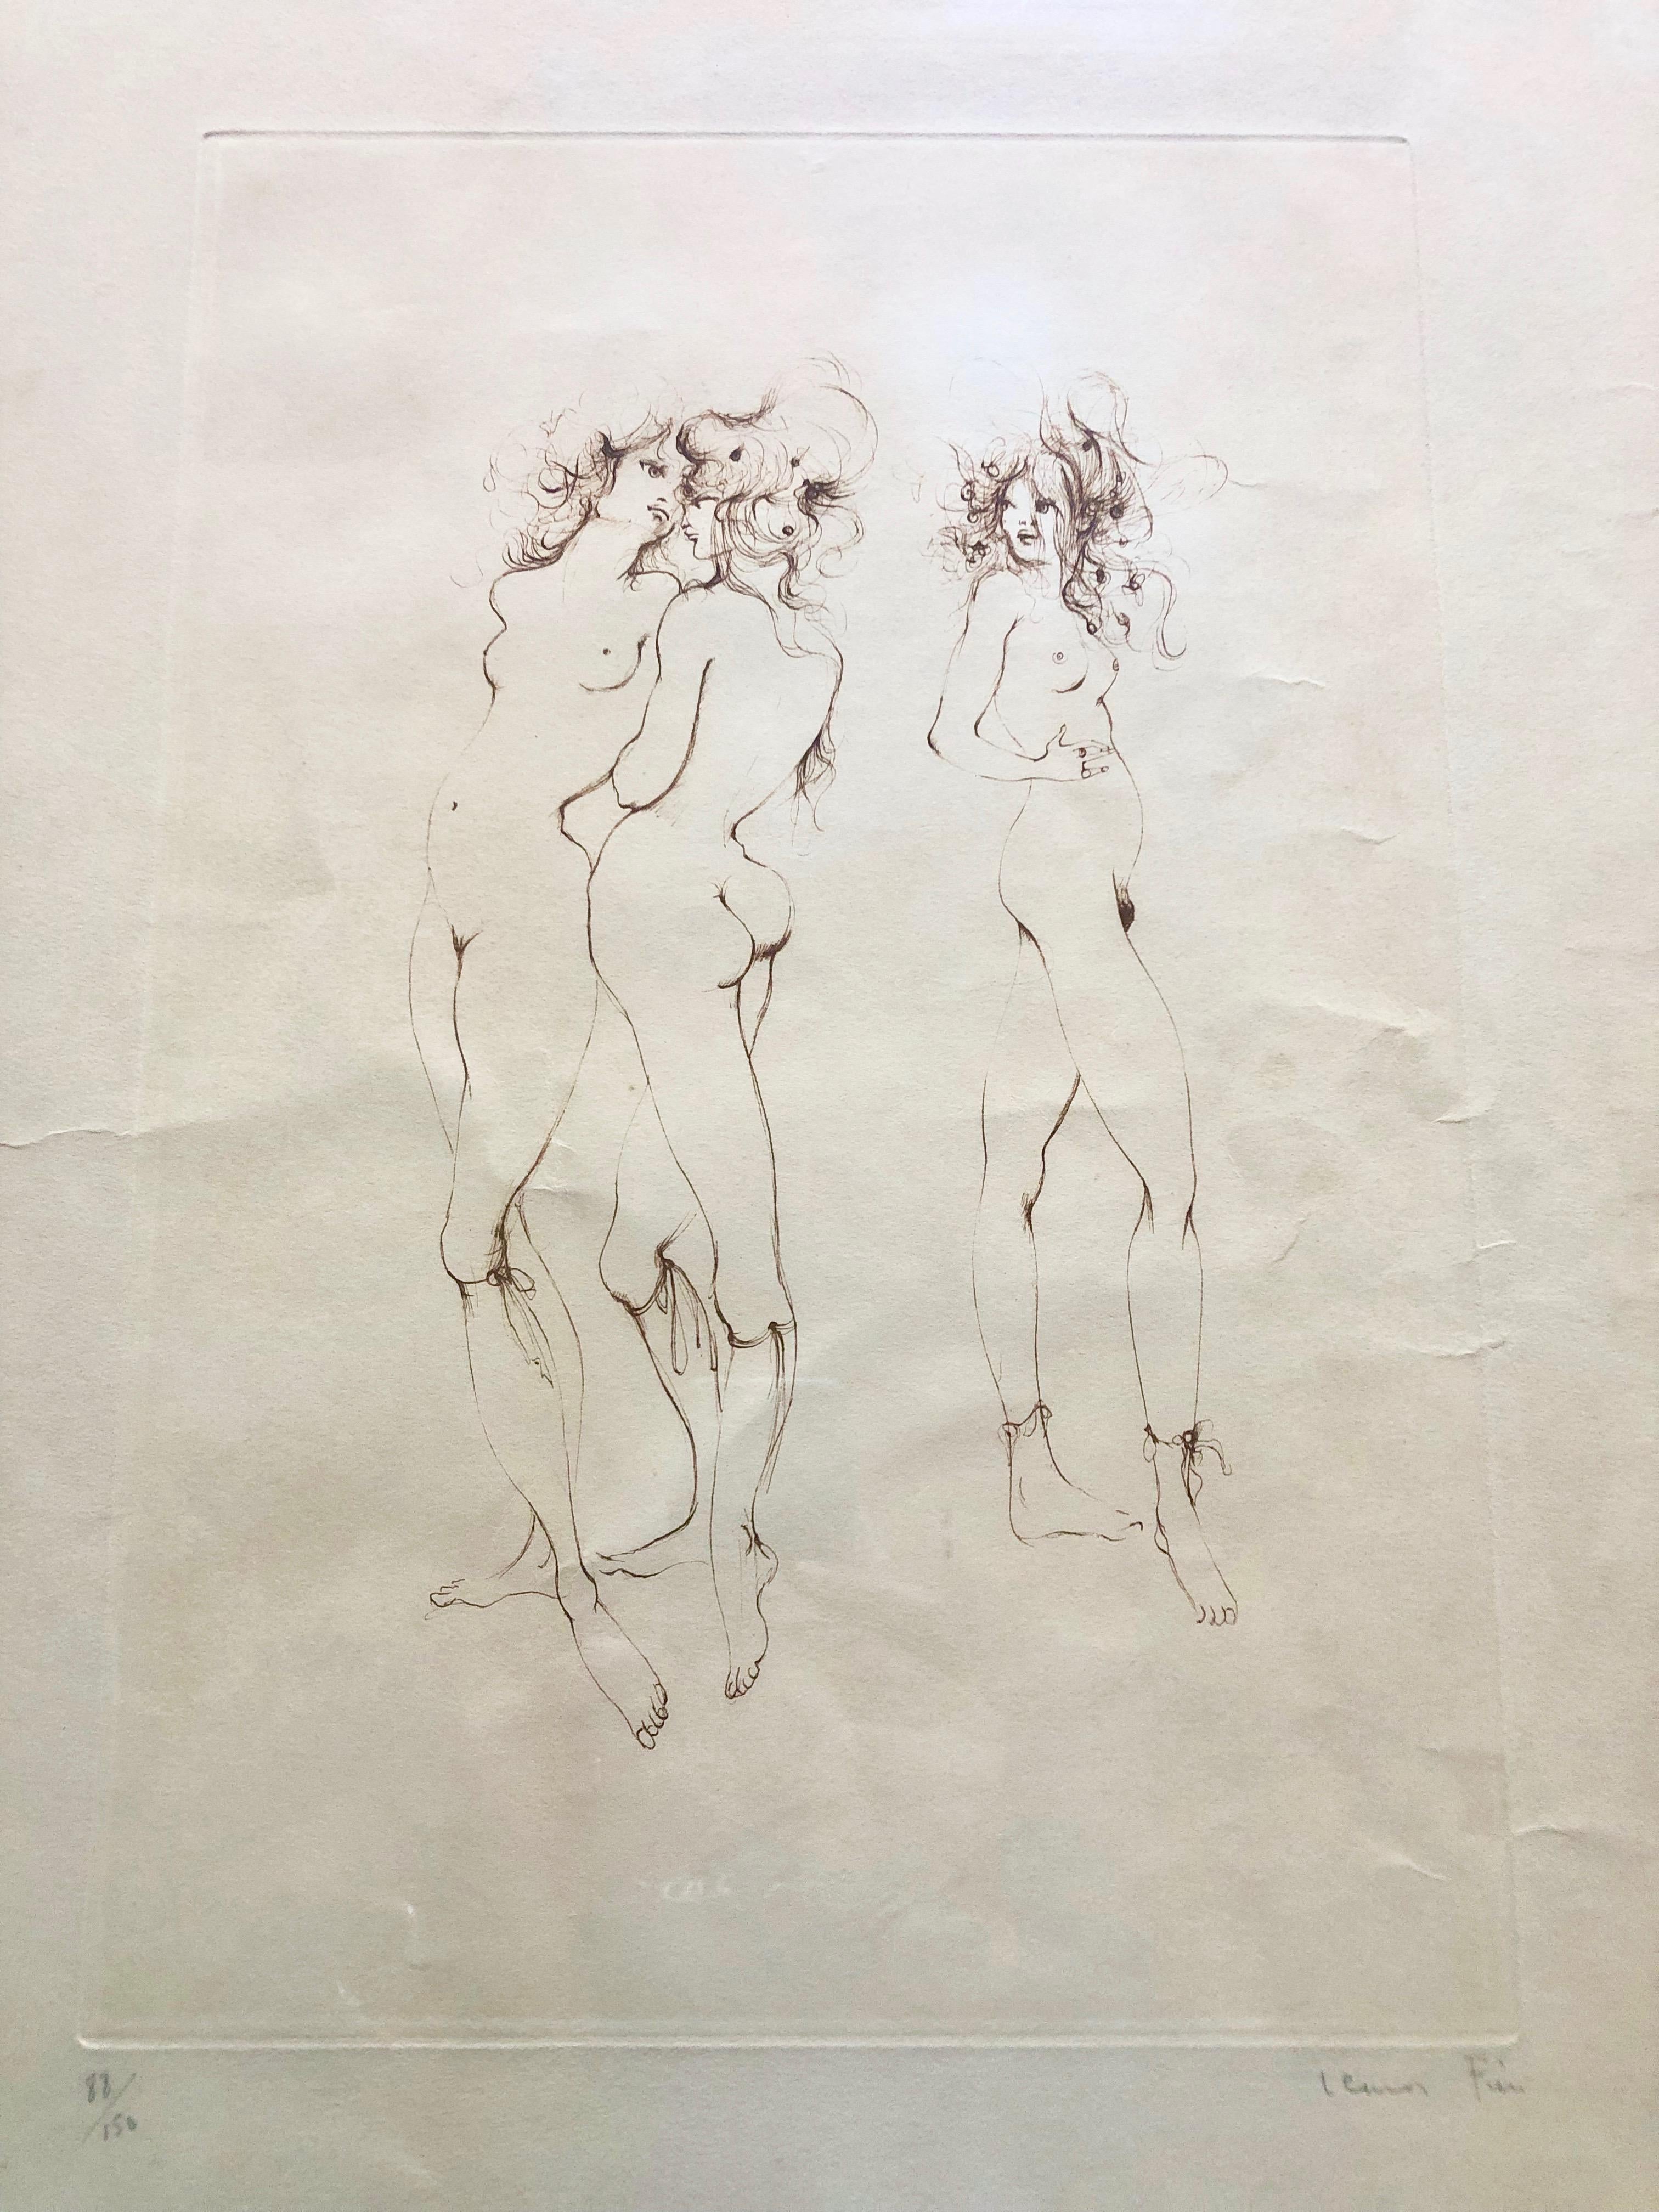 Framed, Signed And Numbered Etching By Leonor Fini, Three Naked Women 88/150 For Sale 1